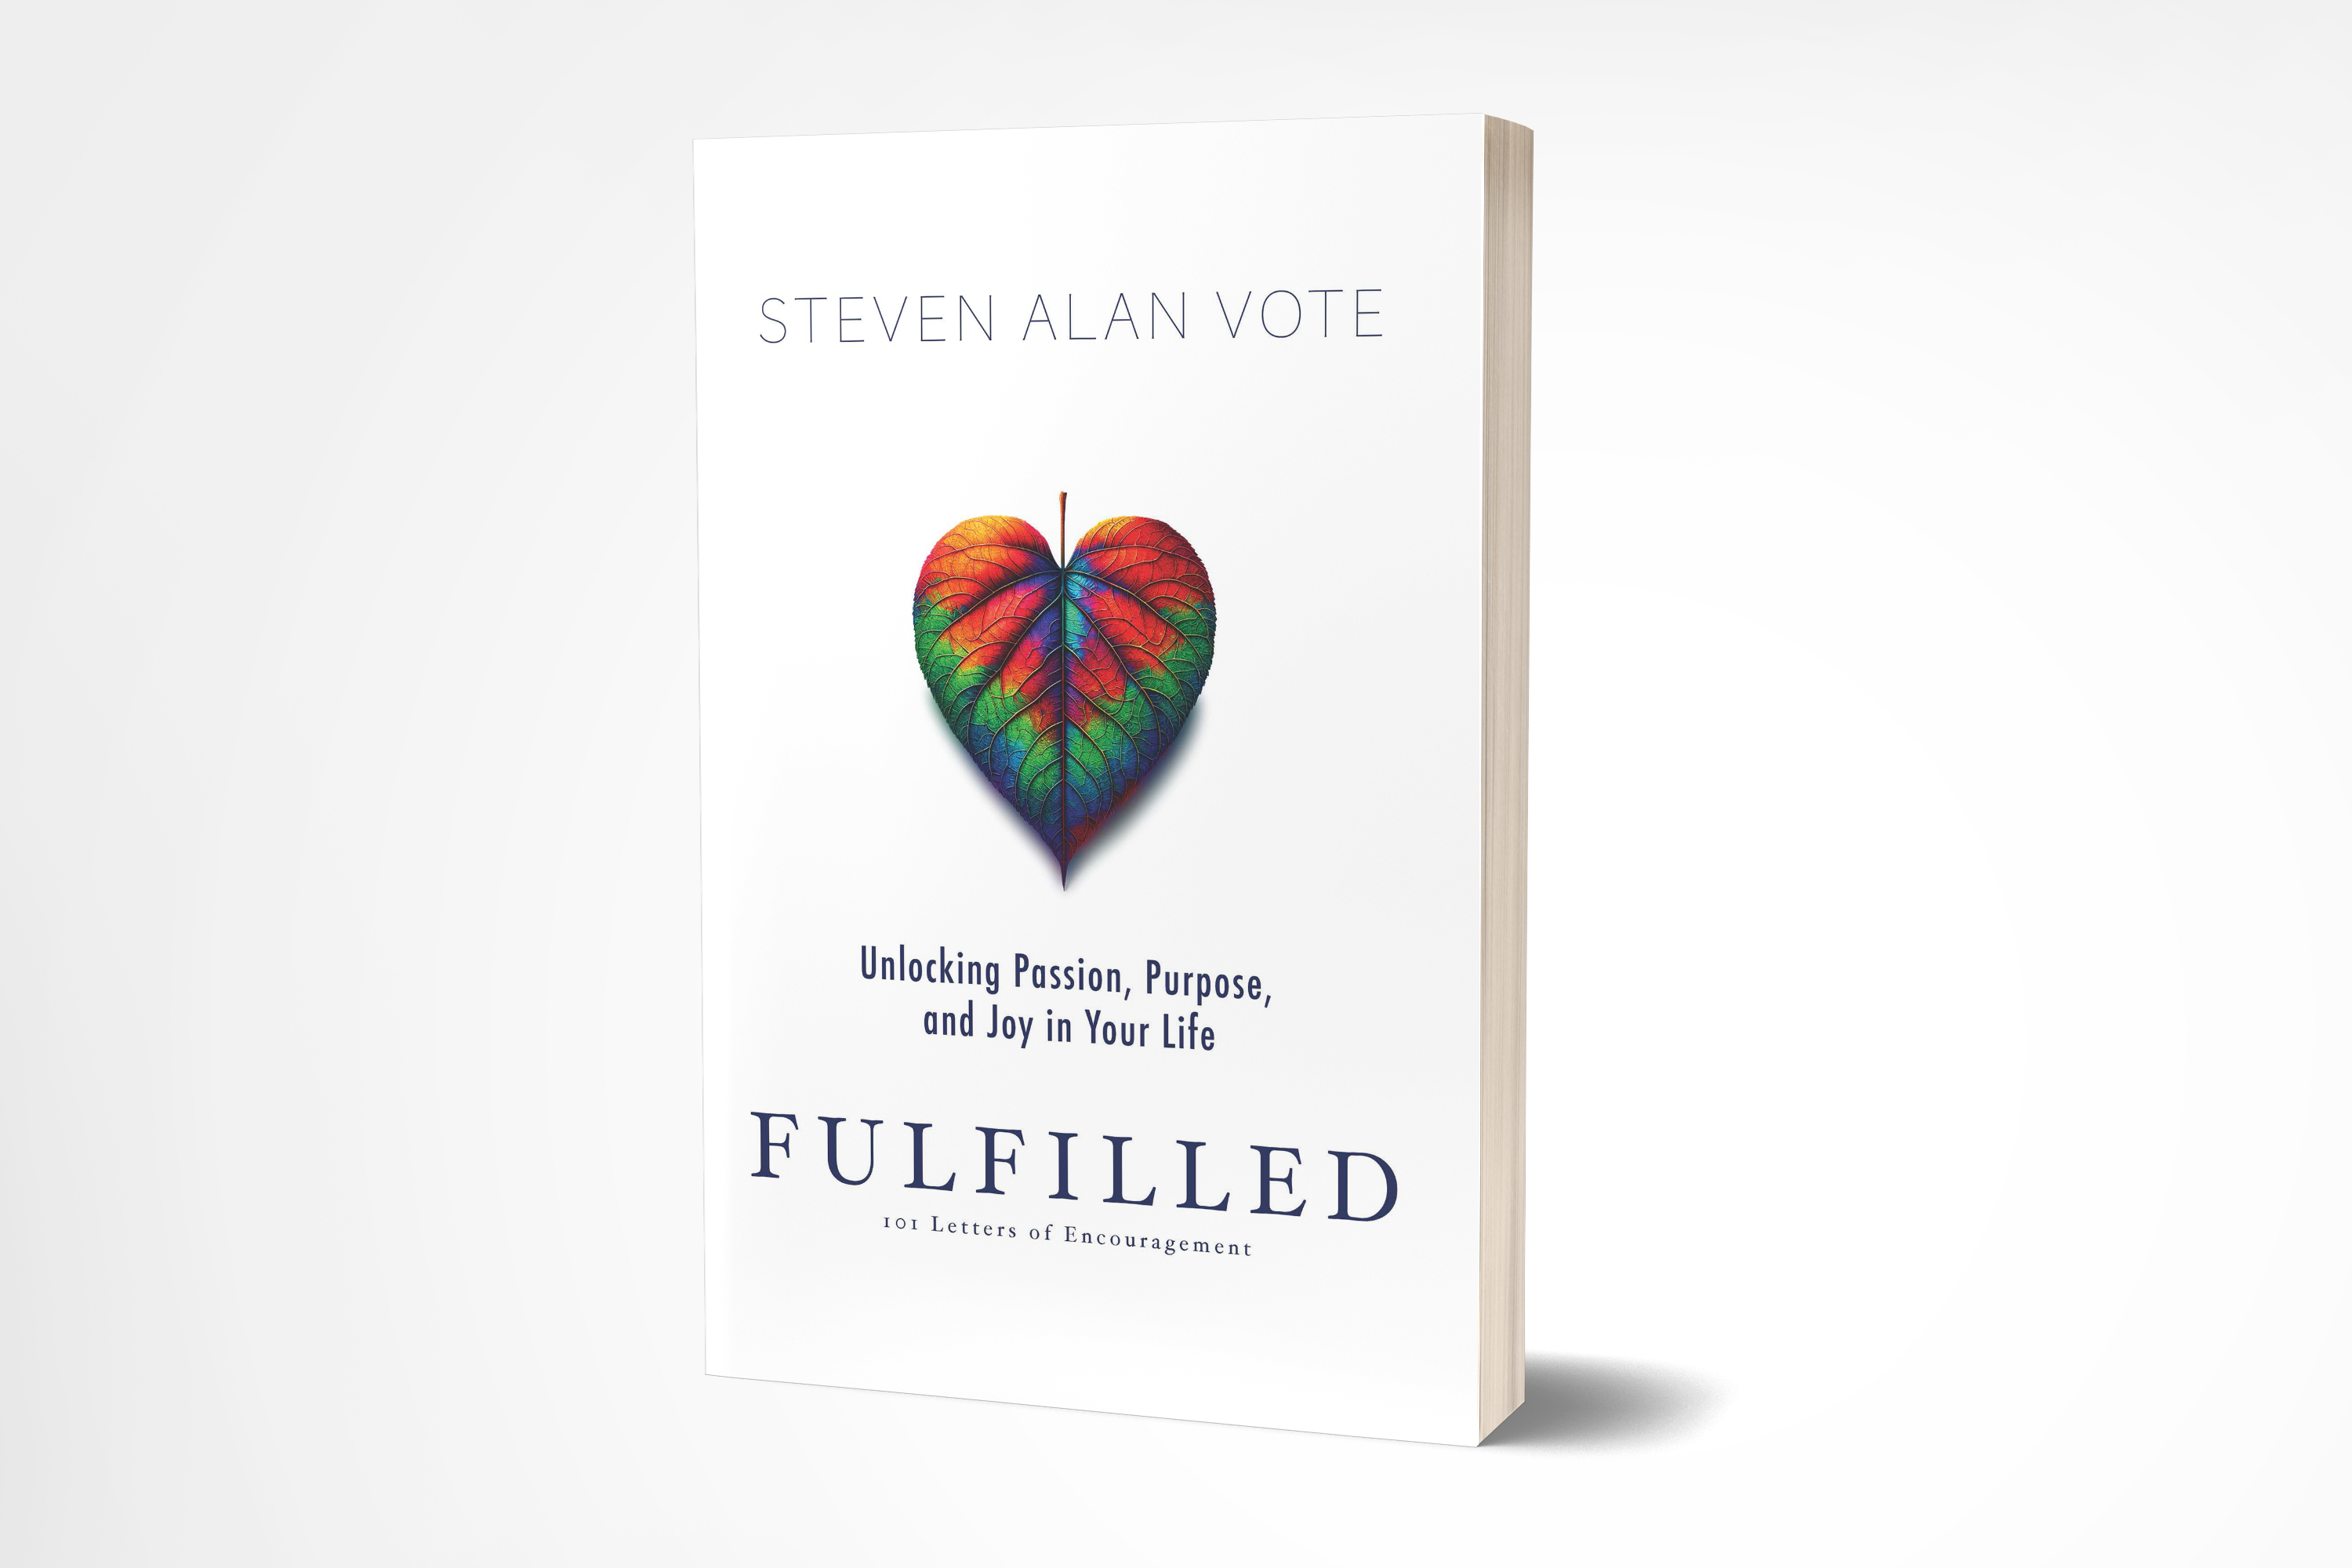 Fulfilled: Unlocking Passion, Purpose, and Joy in Your Life